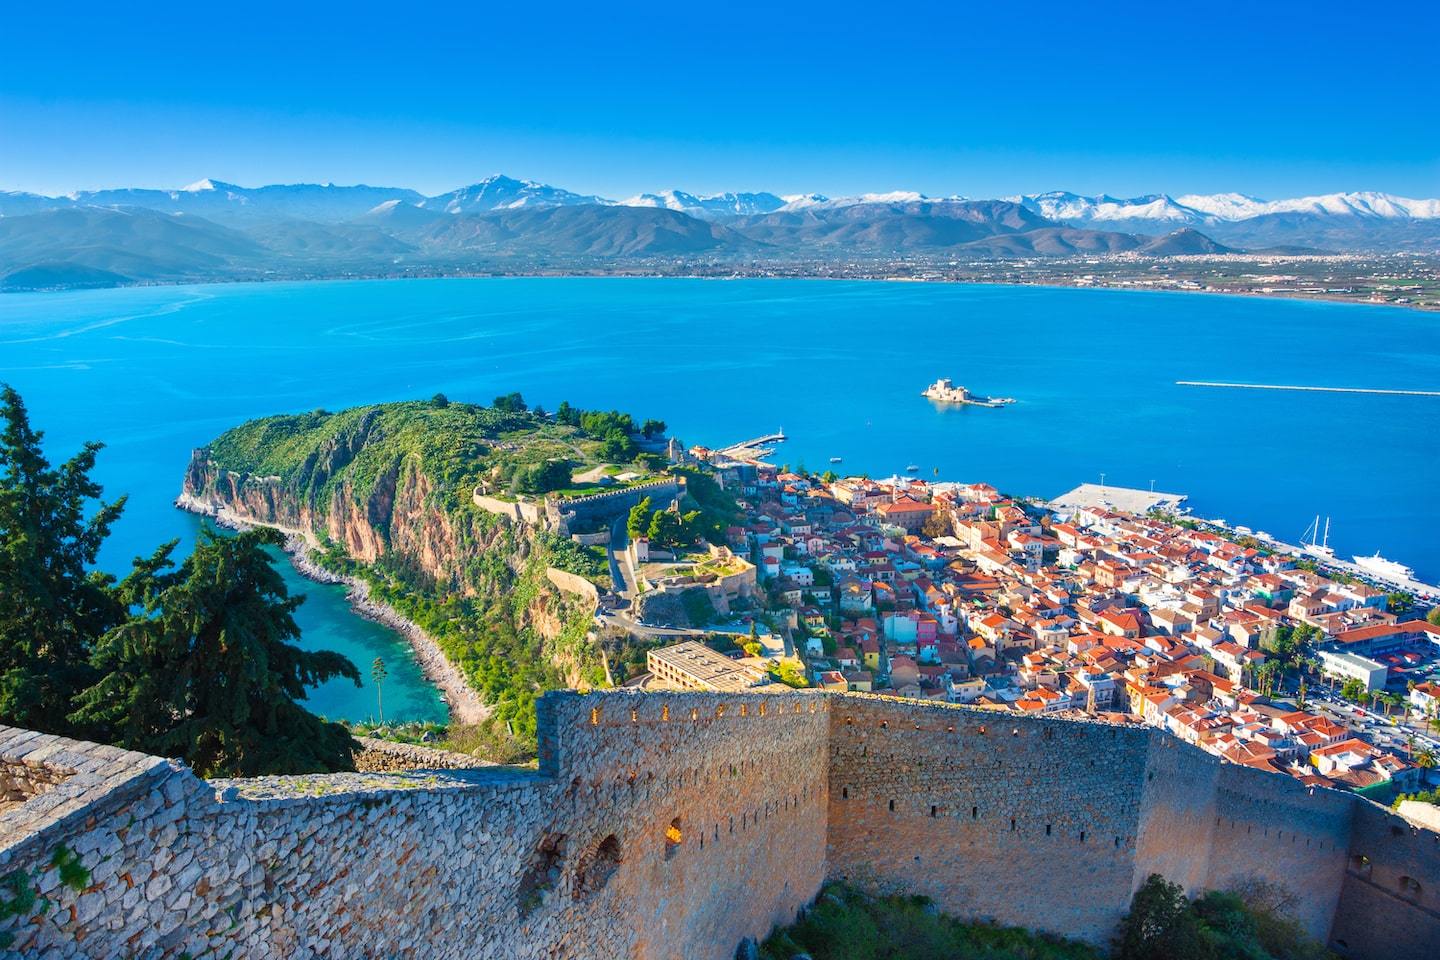 Aerial view of Nafplio, Greece with a piece of land jutting out into the water with mountains behind.